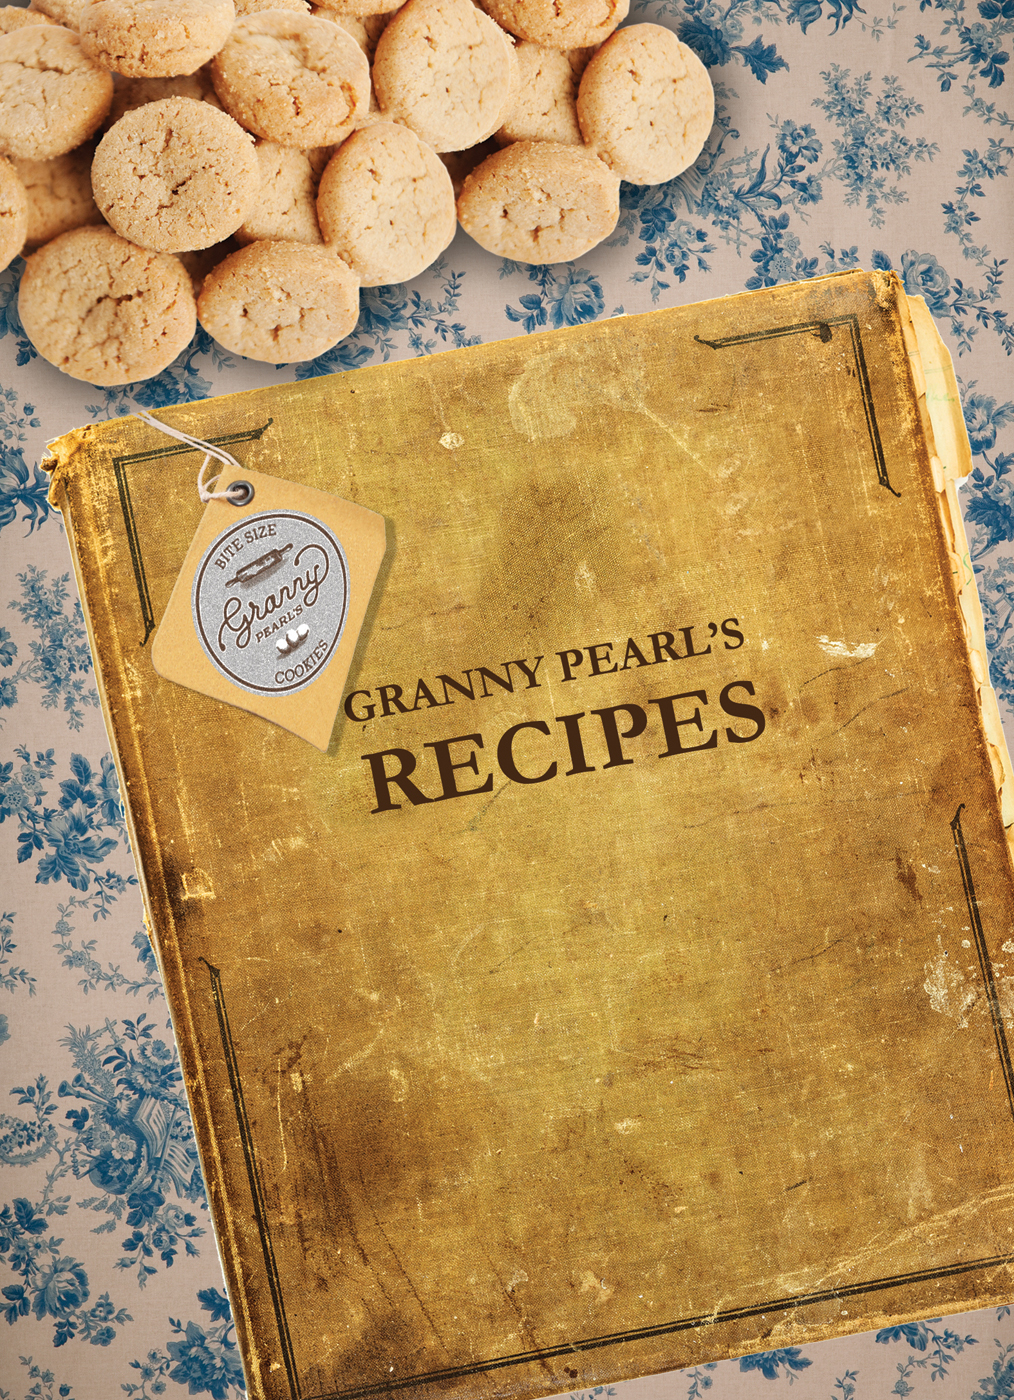 Cookies are made using Granny’s favorite recipes that are over 60 years old.